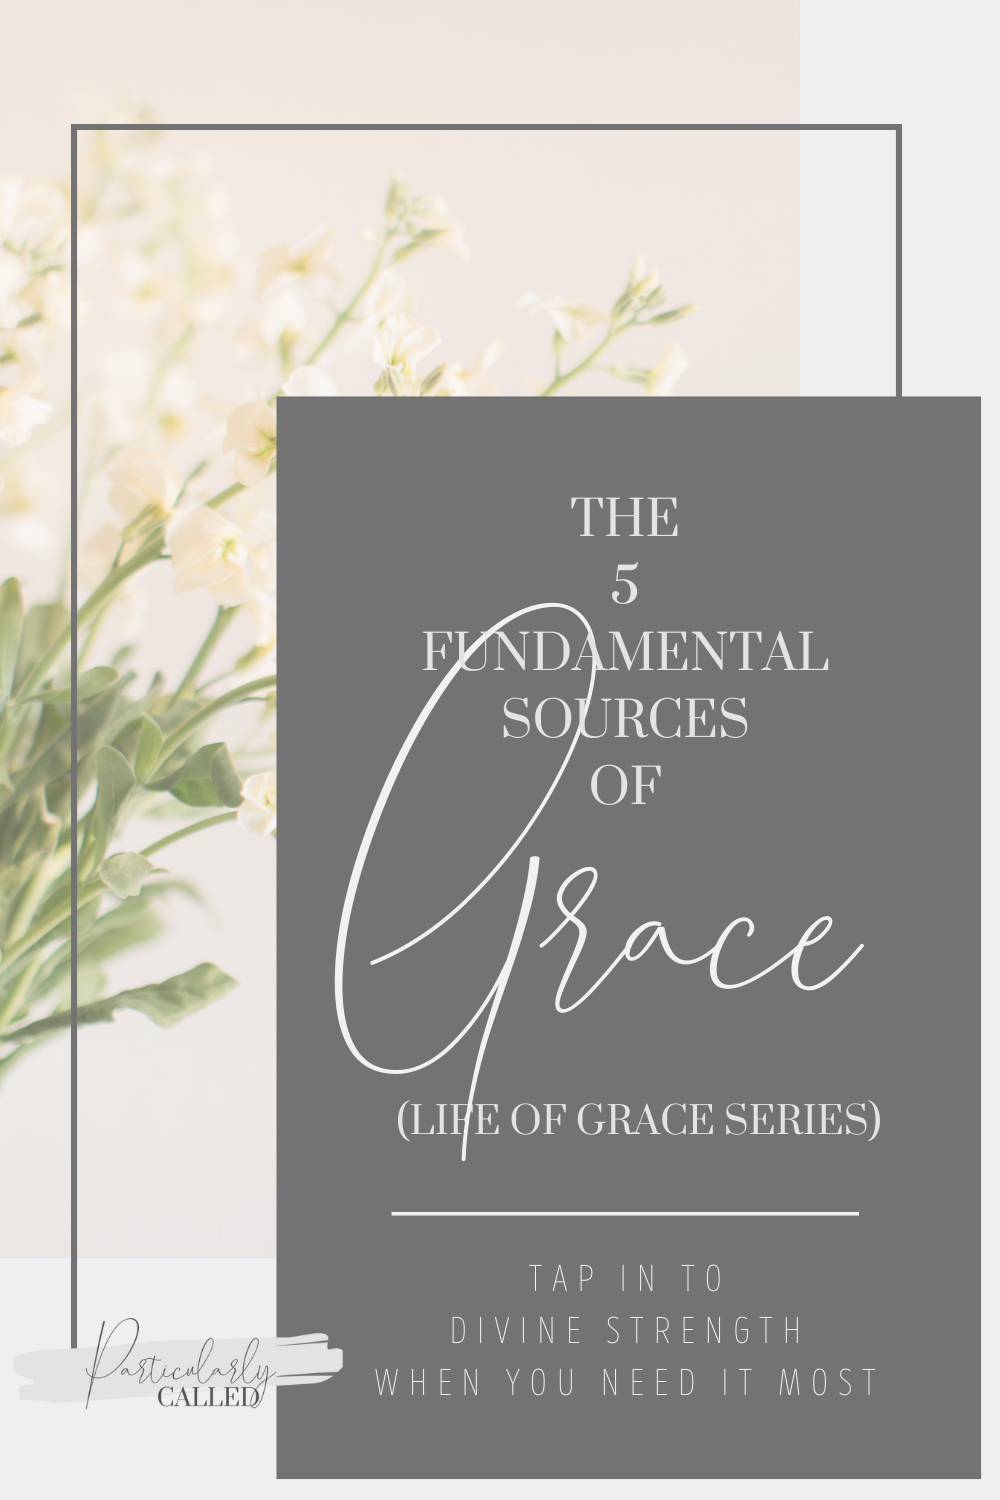 sources-of-grace-gracefilled-life-series